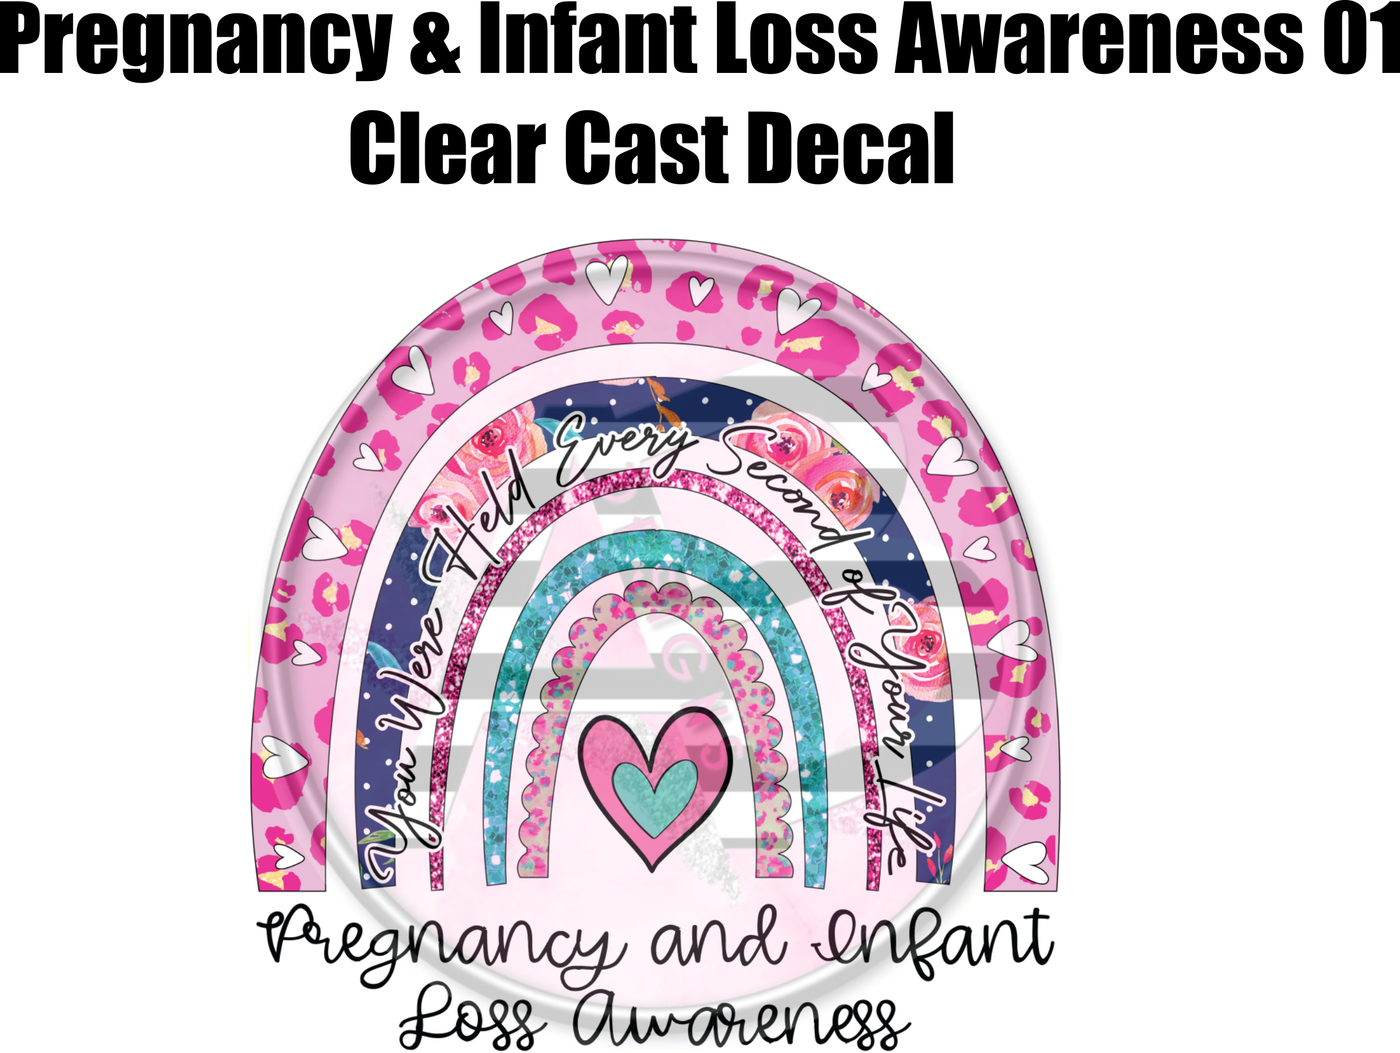 Pregnancy & Infant Loss Awareness 01 - Clear Cast Decal